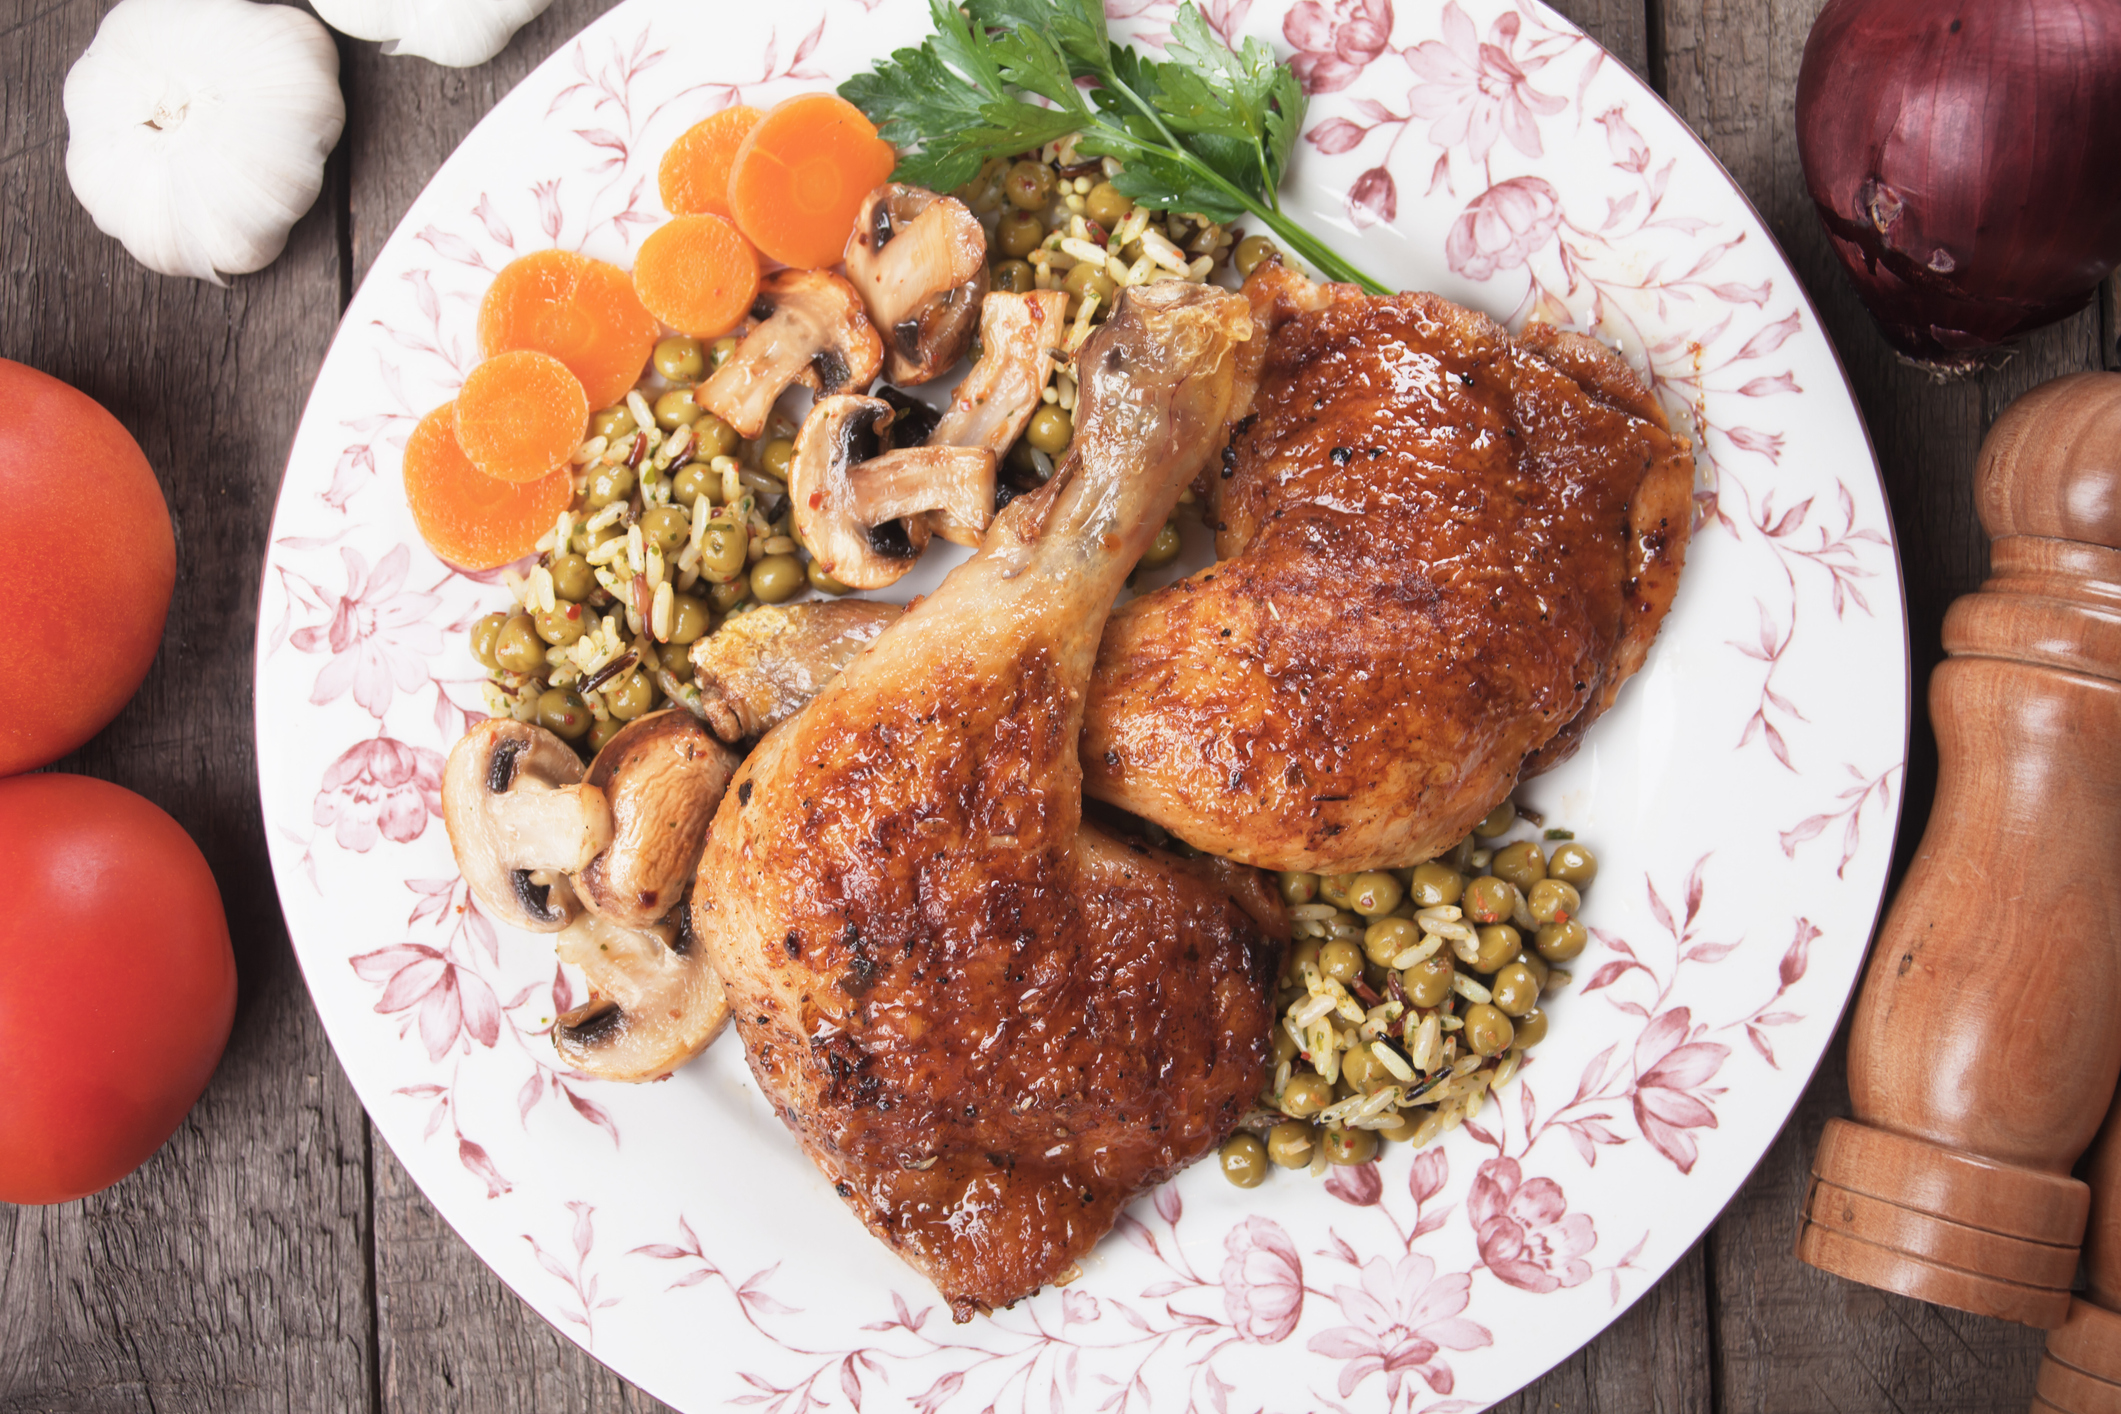 Roasted chicken legs with rice and green peas, classic of traditional cuisine